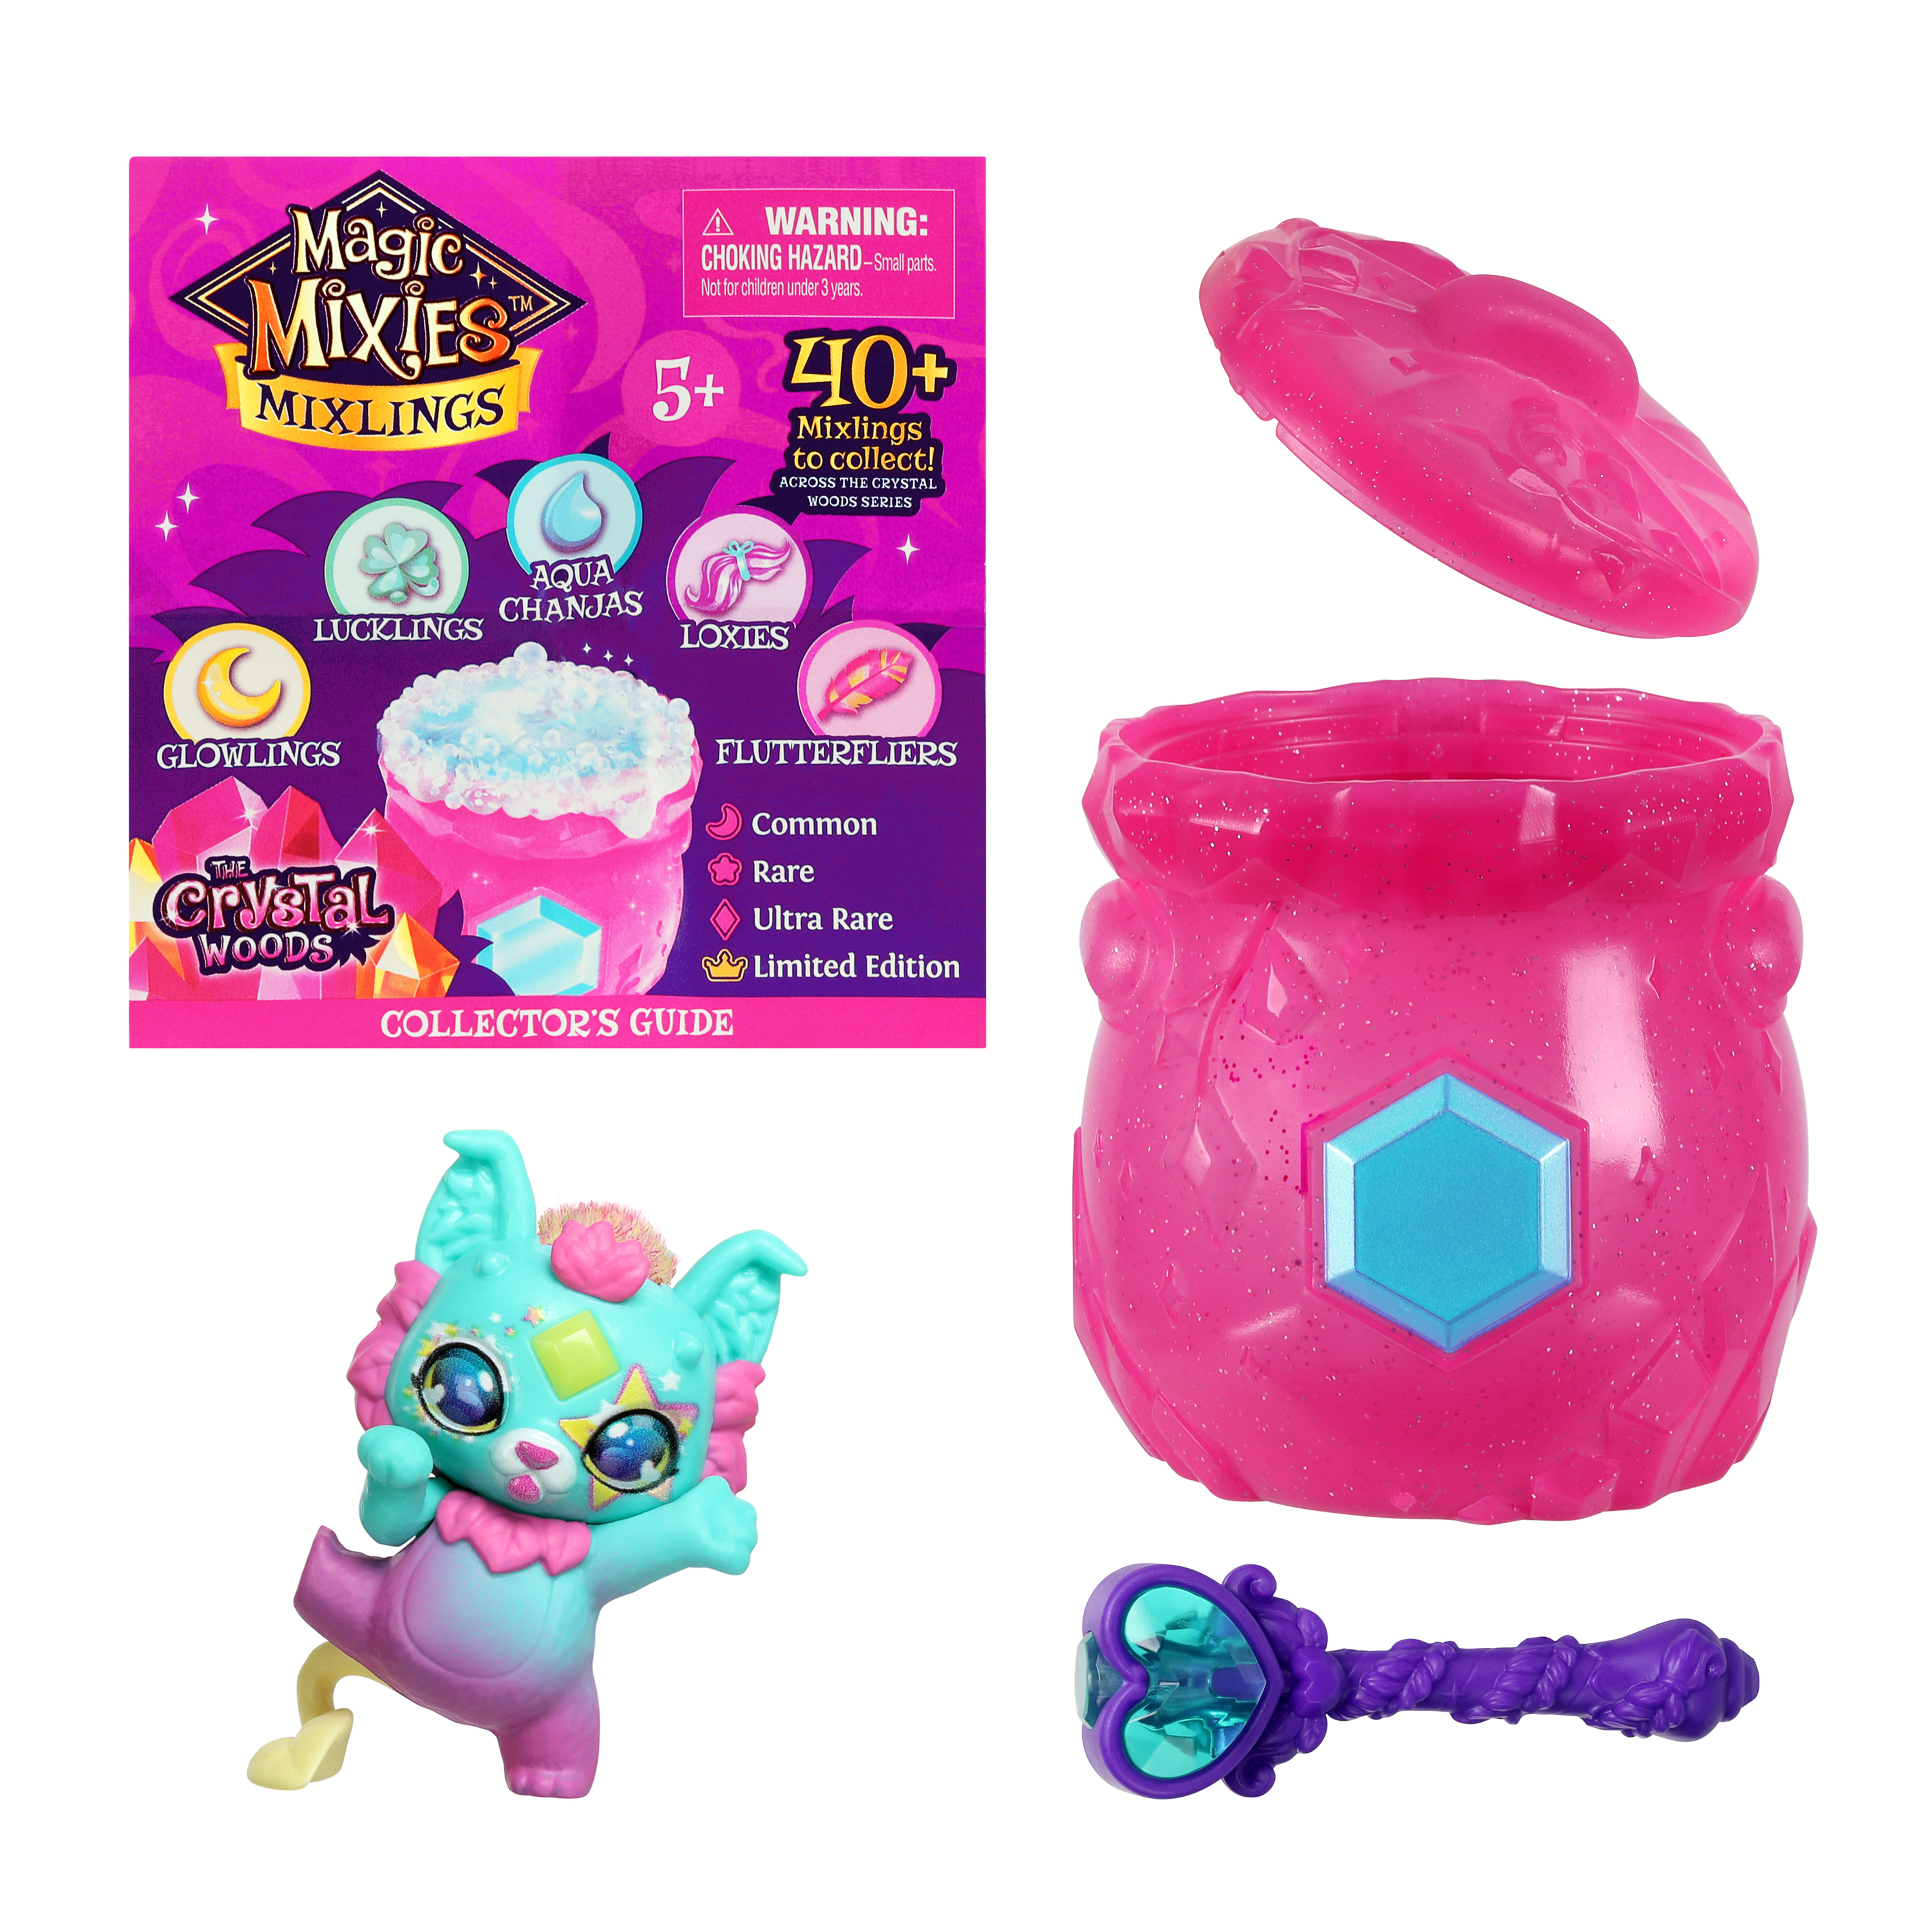 Magic Mixies Mixlings Pink Single Pack with Magical Fizz and Reveal, 40+  Collect, Ages 5+ - image 1 of 18